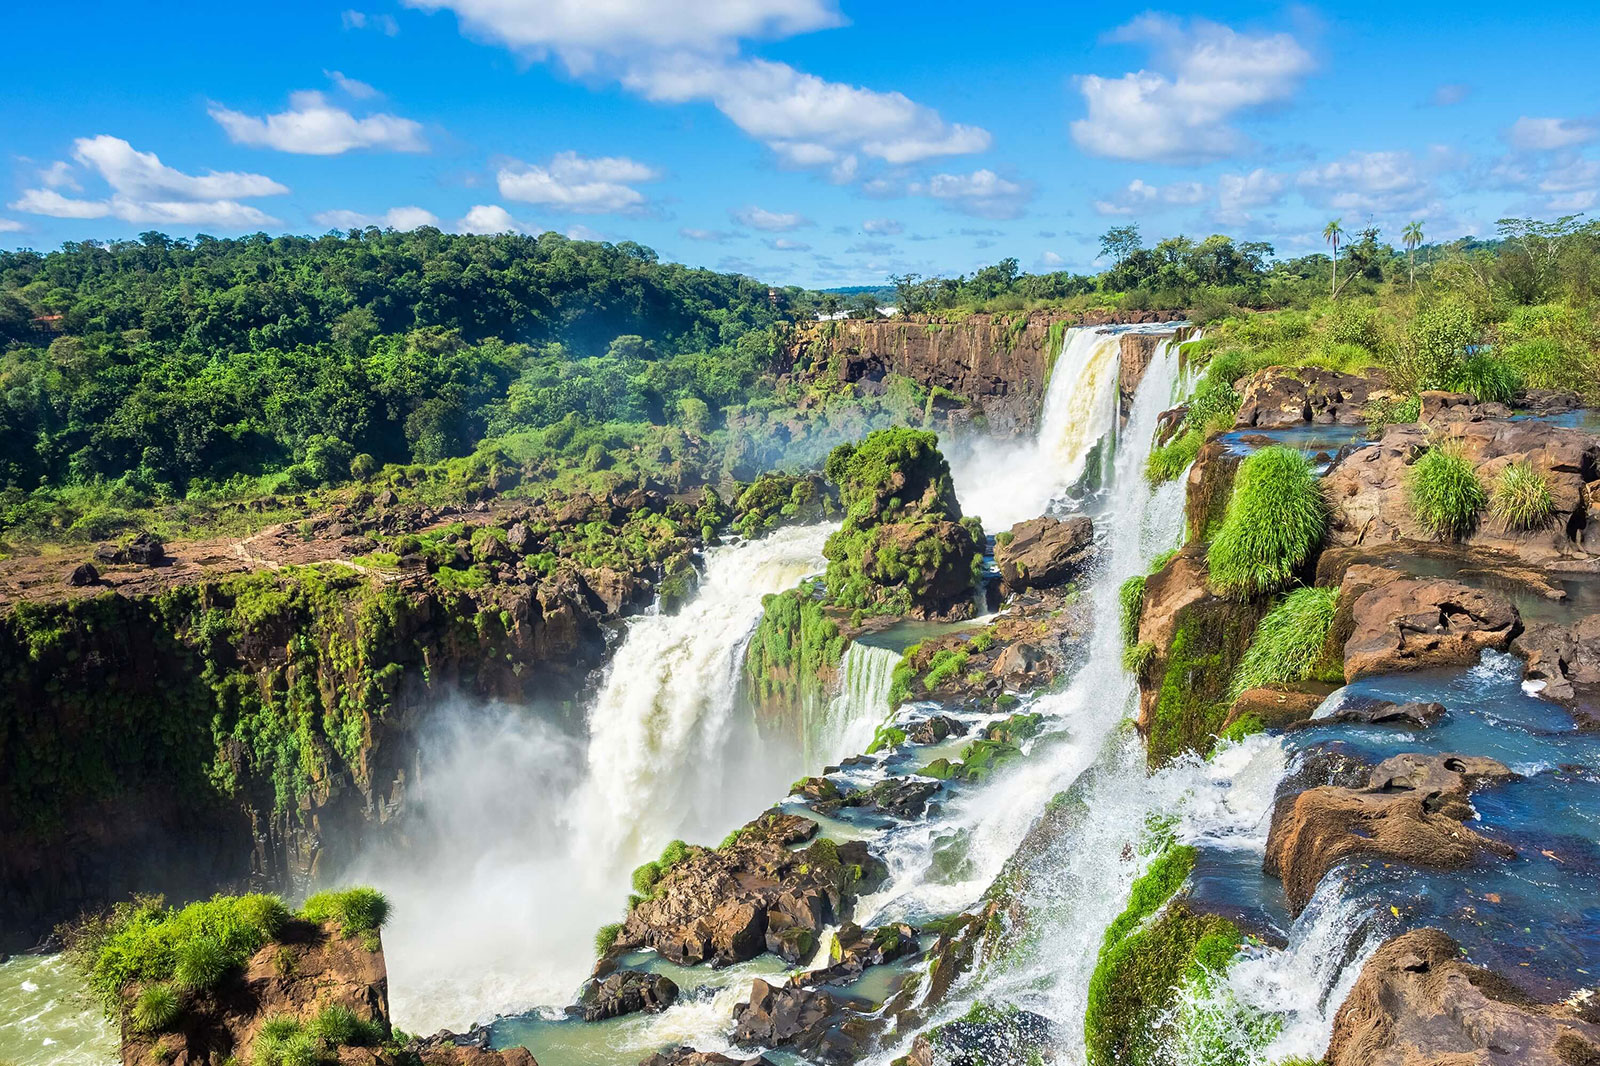 How Good Is Your Geography Knowledge? Iguaza Falls, Paraguay